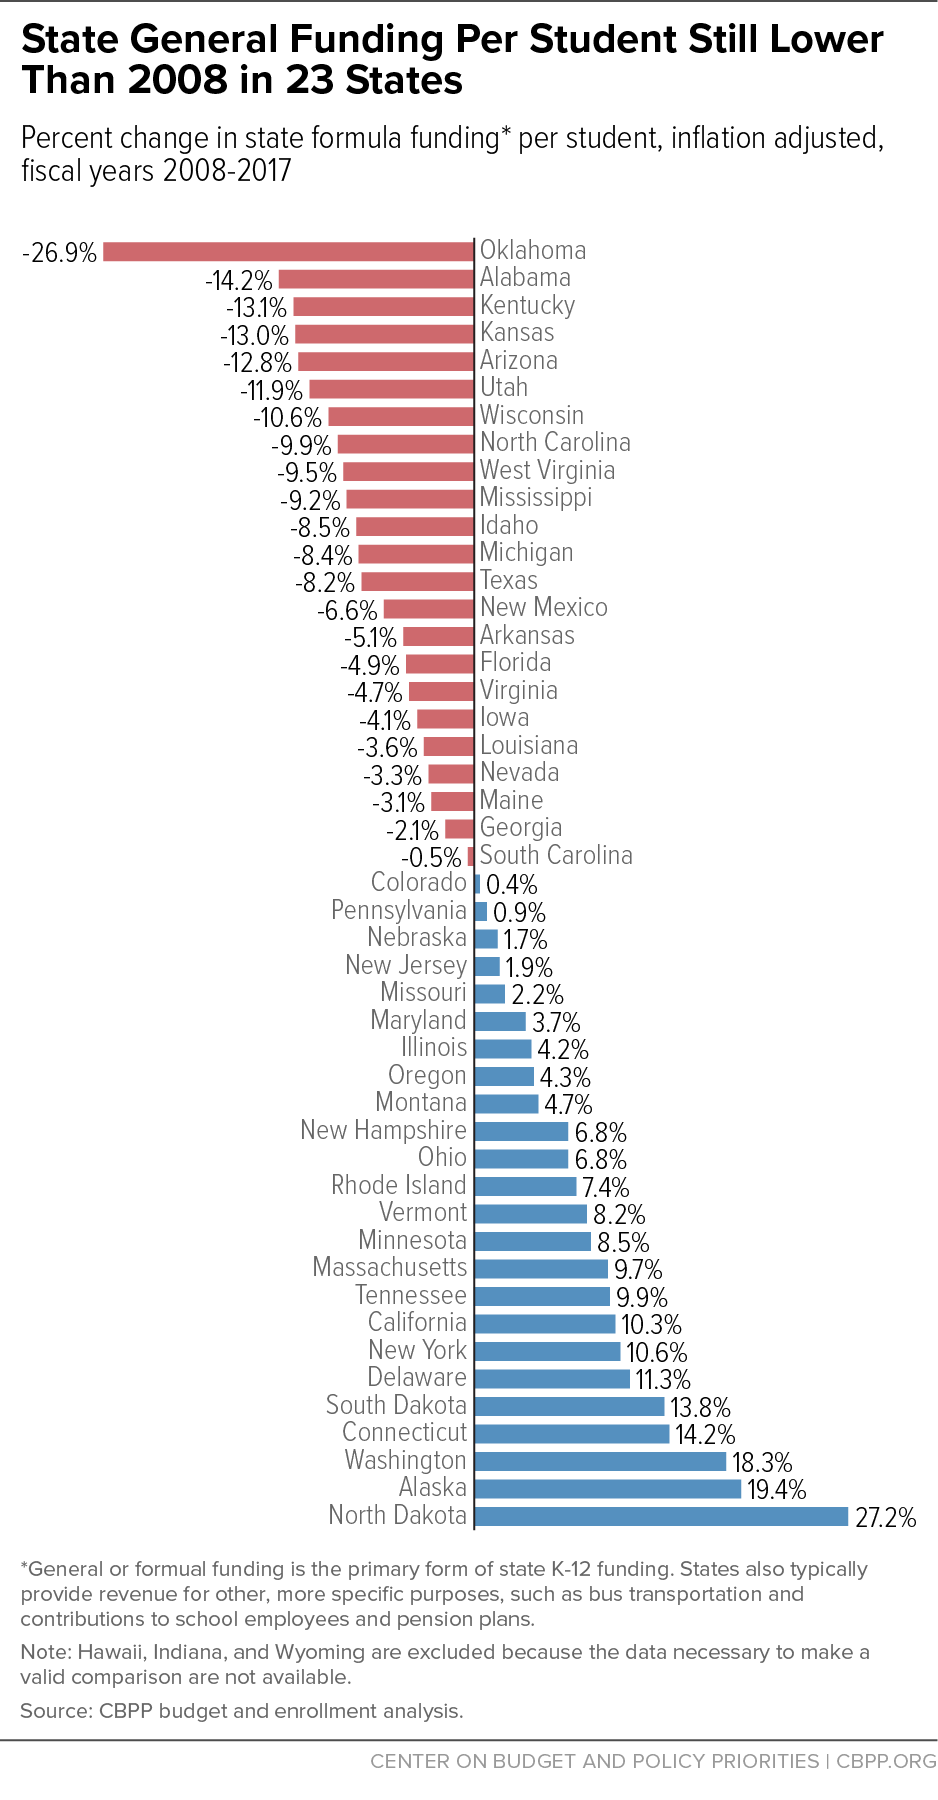 State General Funding Per Student Still Lower Than 2008 in 23 States